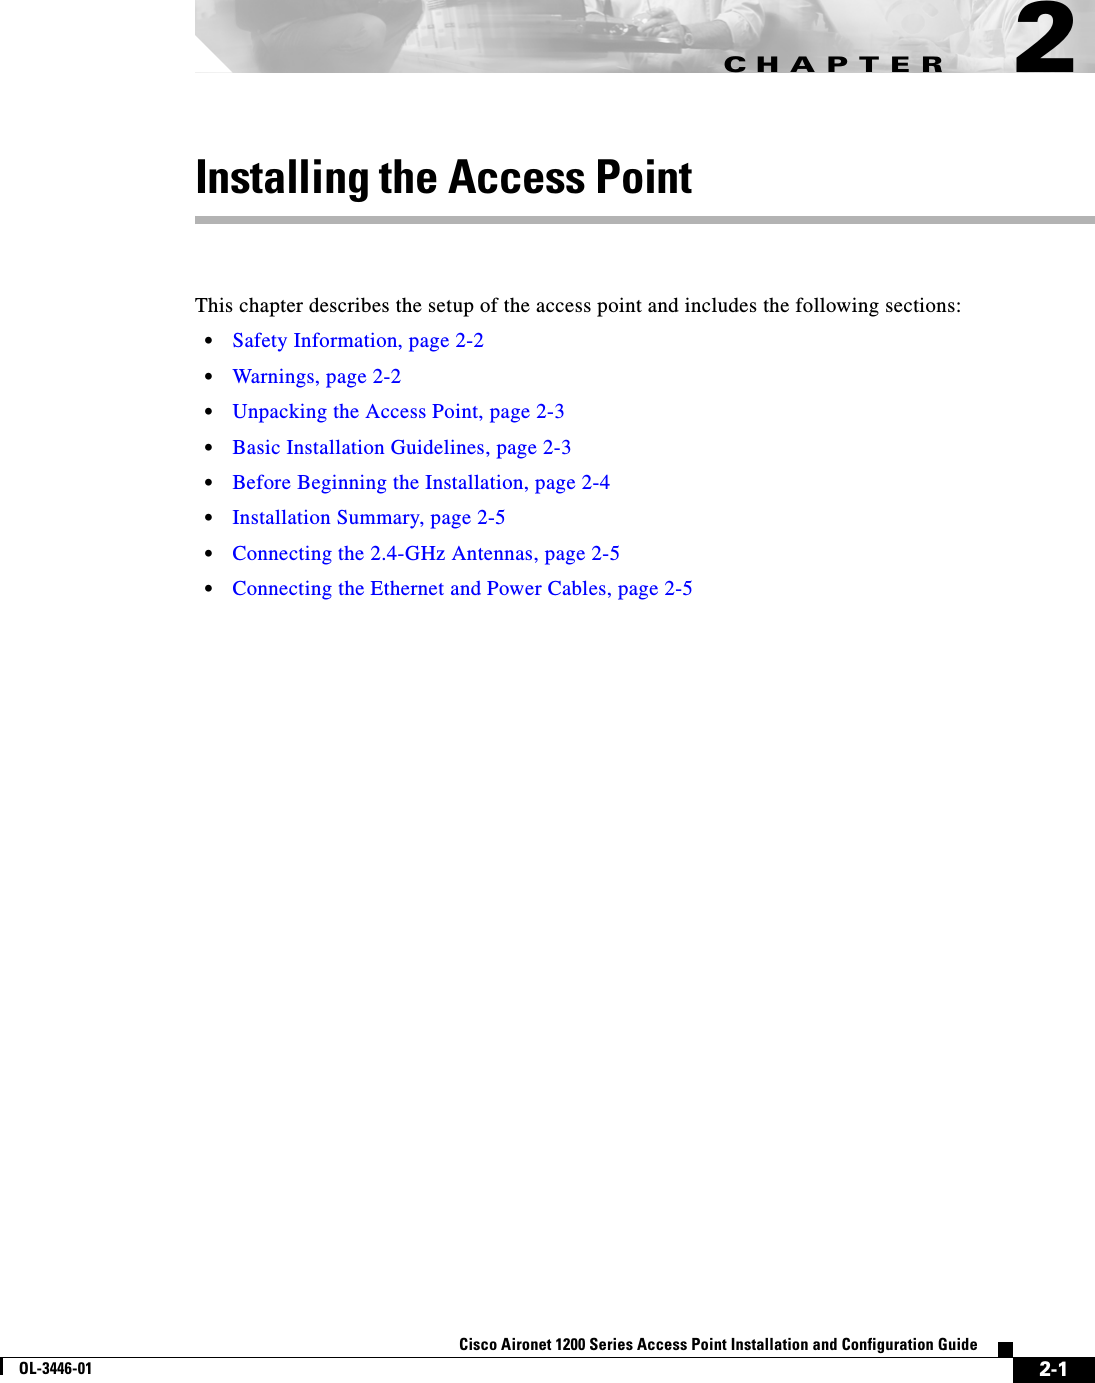 CHAPTER2-1Cisco Aironet 1200 Series Access Point Installation and Configuration GuideOL-3446-012Installing the Access PointThis chapter describes the setup of the access point and includes the following sections:•Safety Information, page 2-2•Warnings, page 2-2•Unpacking the Access Point, page 2-3•Basic Installation Guidelines, page 2-3•Before Beginning the Installation, page 2-4•Installation Summary, page 2-5•Connecting the 2.4-GHz Antennas, page 2-5•Connecting the Ethernet and Power Cables, page 2-5